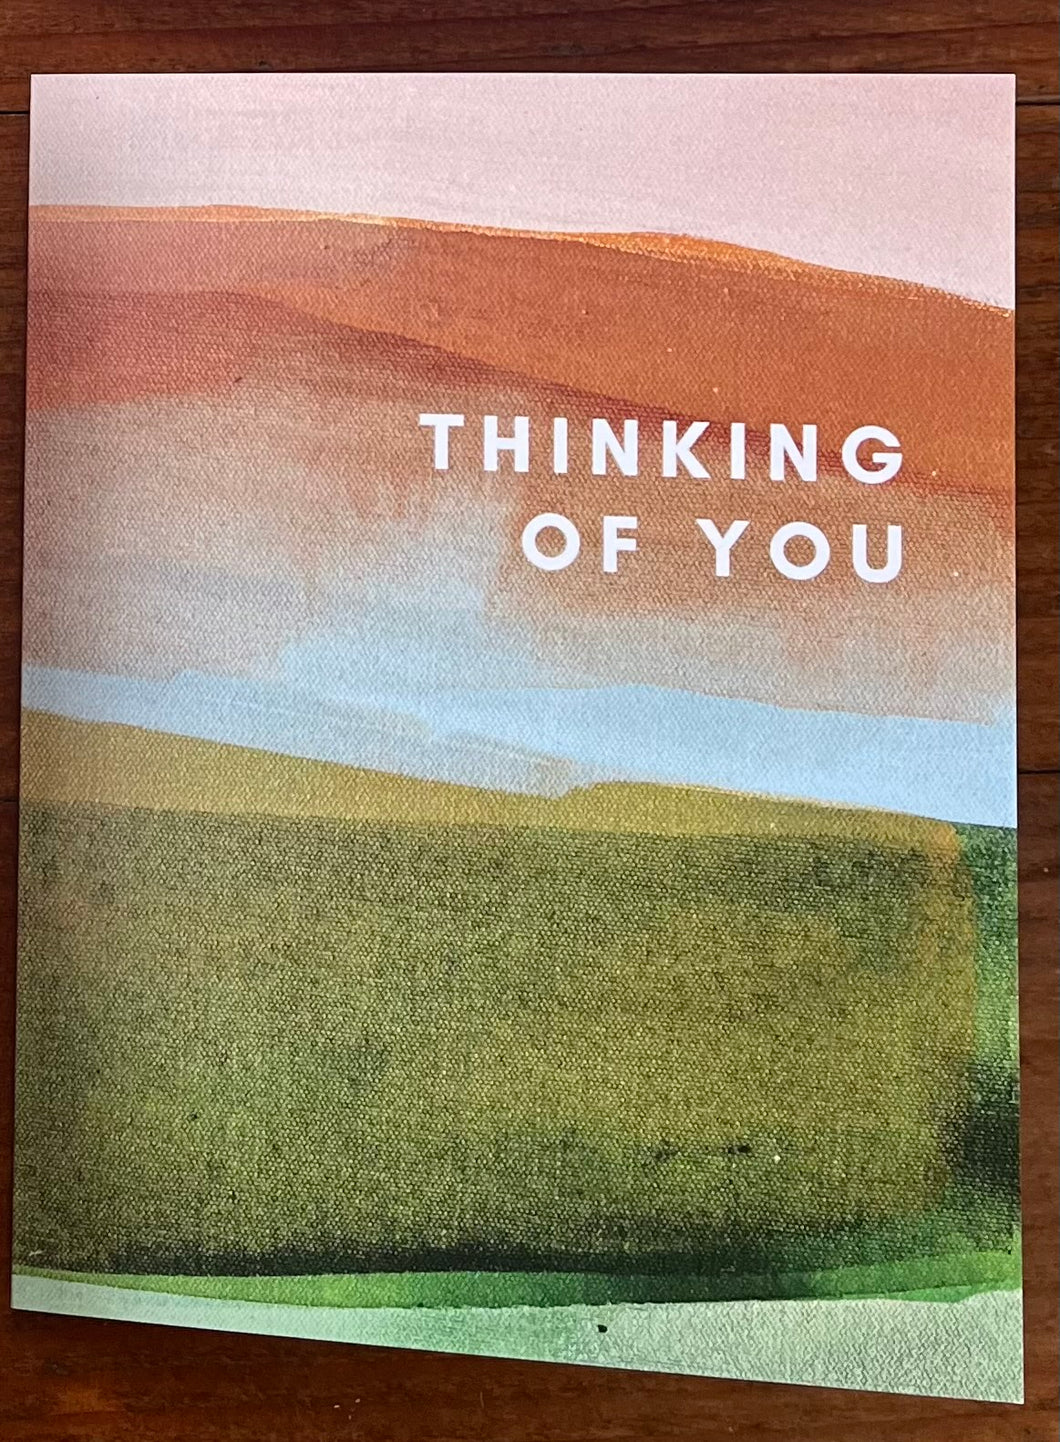 Thinking of You Greeting Card by Gina Gaetz